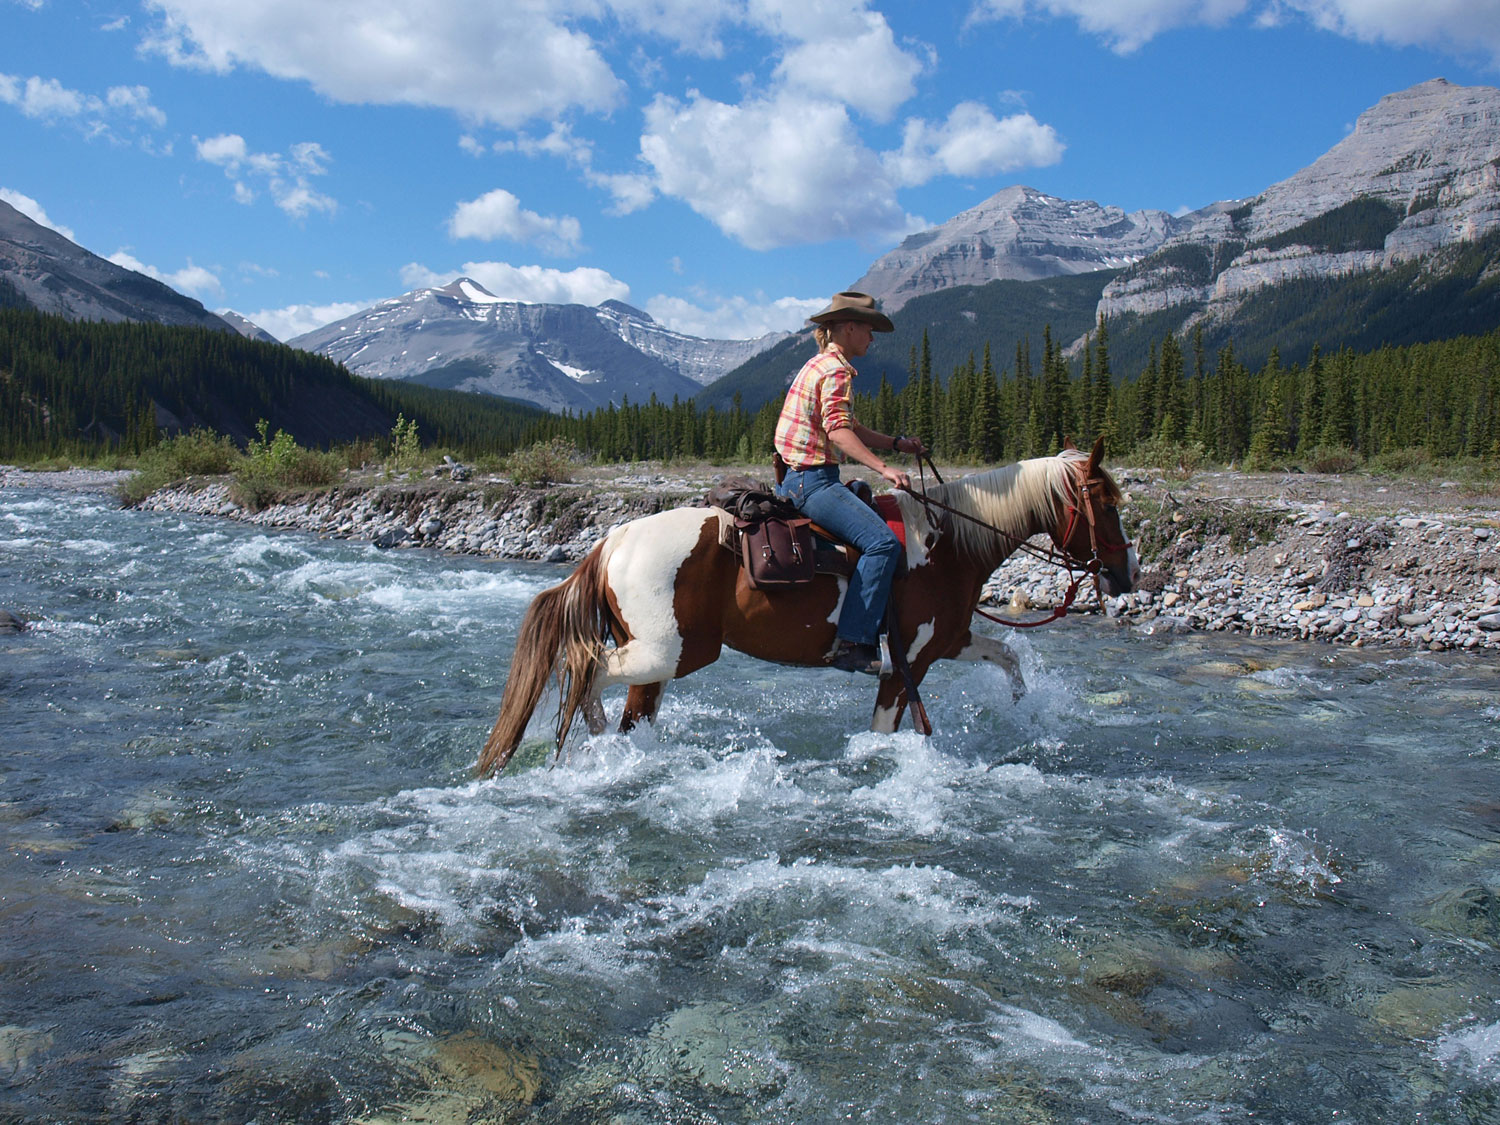 The Cowboy Trail at the Elbow River